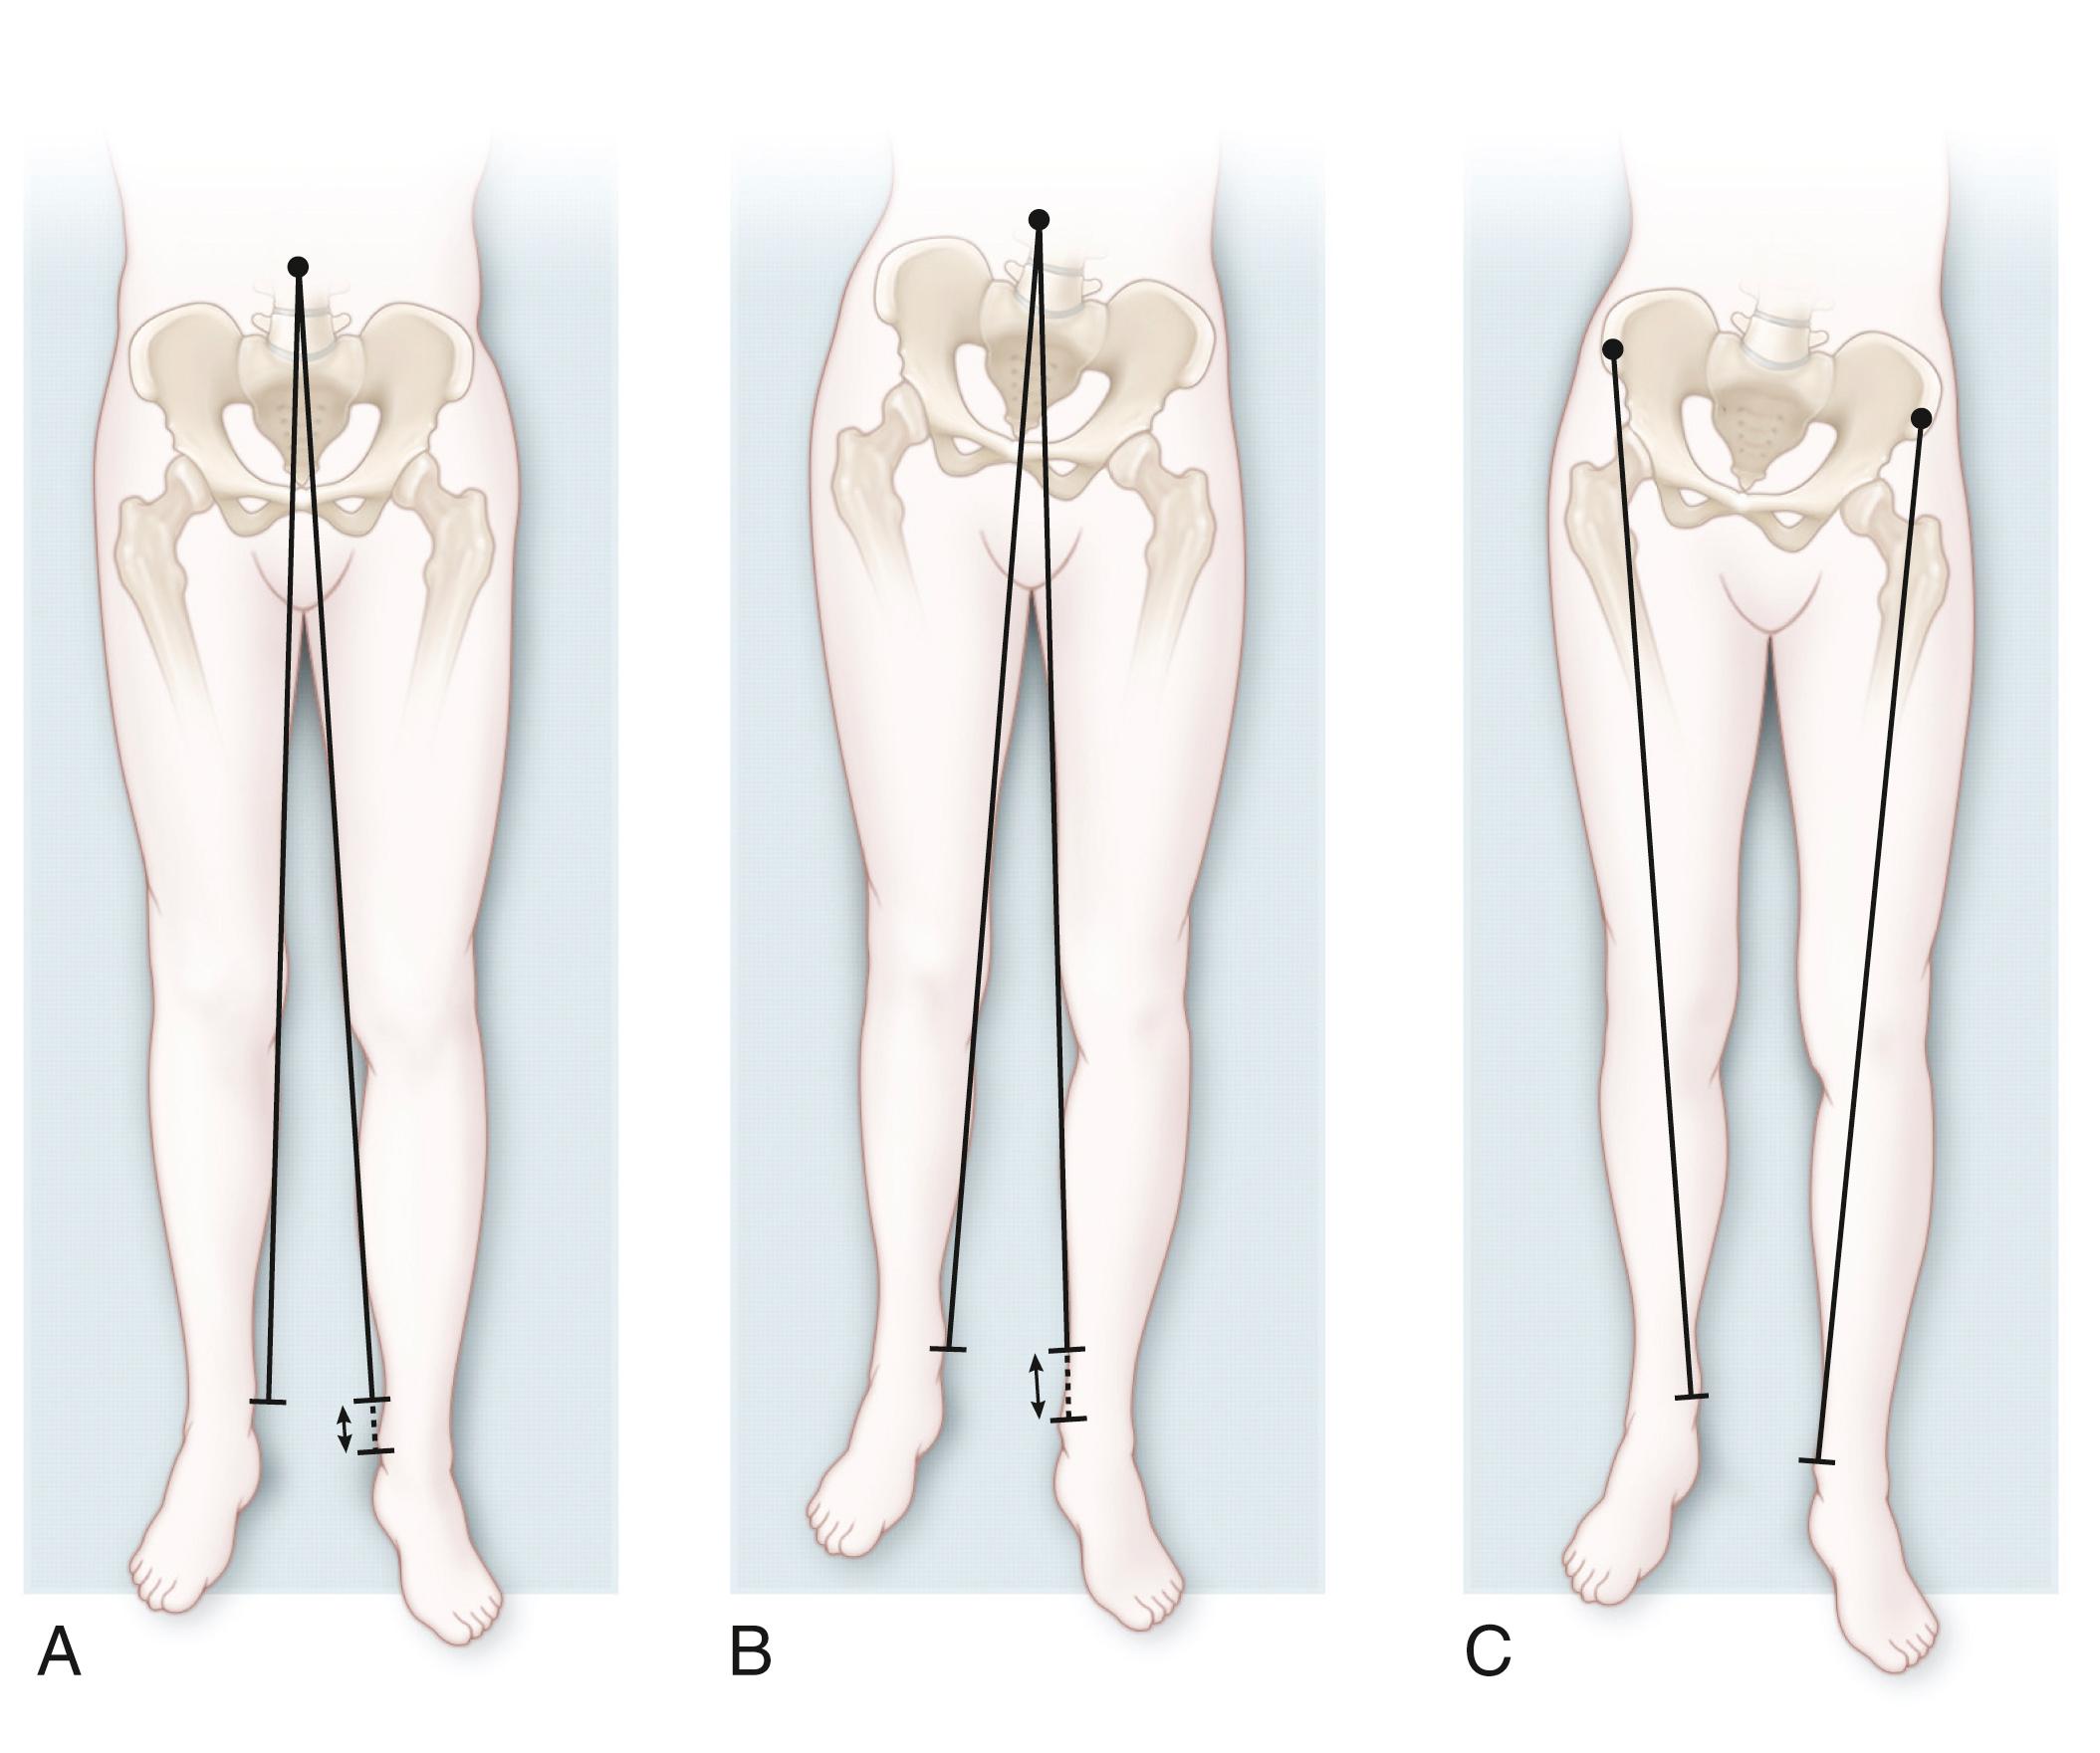 Fig. 20.4, Assessment of functional and actual leg length inequality on the examining table by using a tape measure. Typically, the legs are measured from the umbilicus to the medial malleolus (functional or apparent discrepancy) and from the anterior superior iliac spine to the medial malleolus (actual, true, or structural discrepancy). (A) With the legs in an extended and neutral position, their lengths are unequal when measured both from the umbilicus to the medial malleolus (left leg longer than right) and from the anterior iliac spine to the medial malleolus in a patient with structural leg length discrepancy. (B) In a patient with fixed pelvic obliquity but no true limb length inequality, asymmetry is noted on the measurement of functional leg inequality (from the umbilicus). In this example, the adducted left leg measures longer than the right. (C) Measurement from the anterior superior iliac spine to the medial malleolus demonstrates no structural leg length inequality in the same patient as in (B).